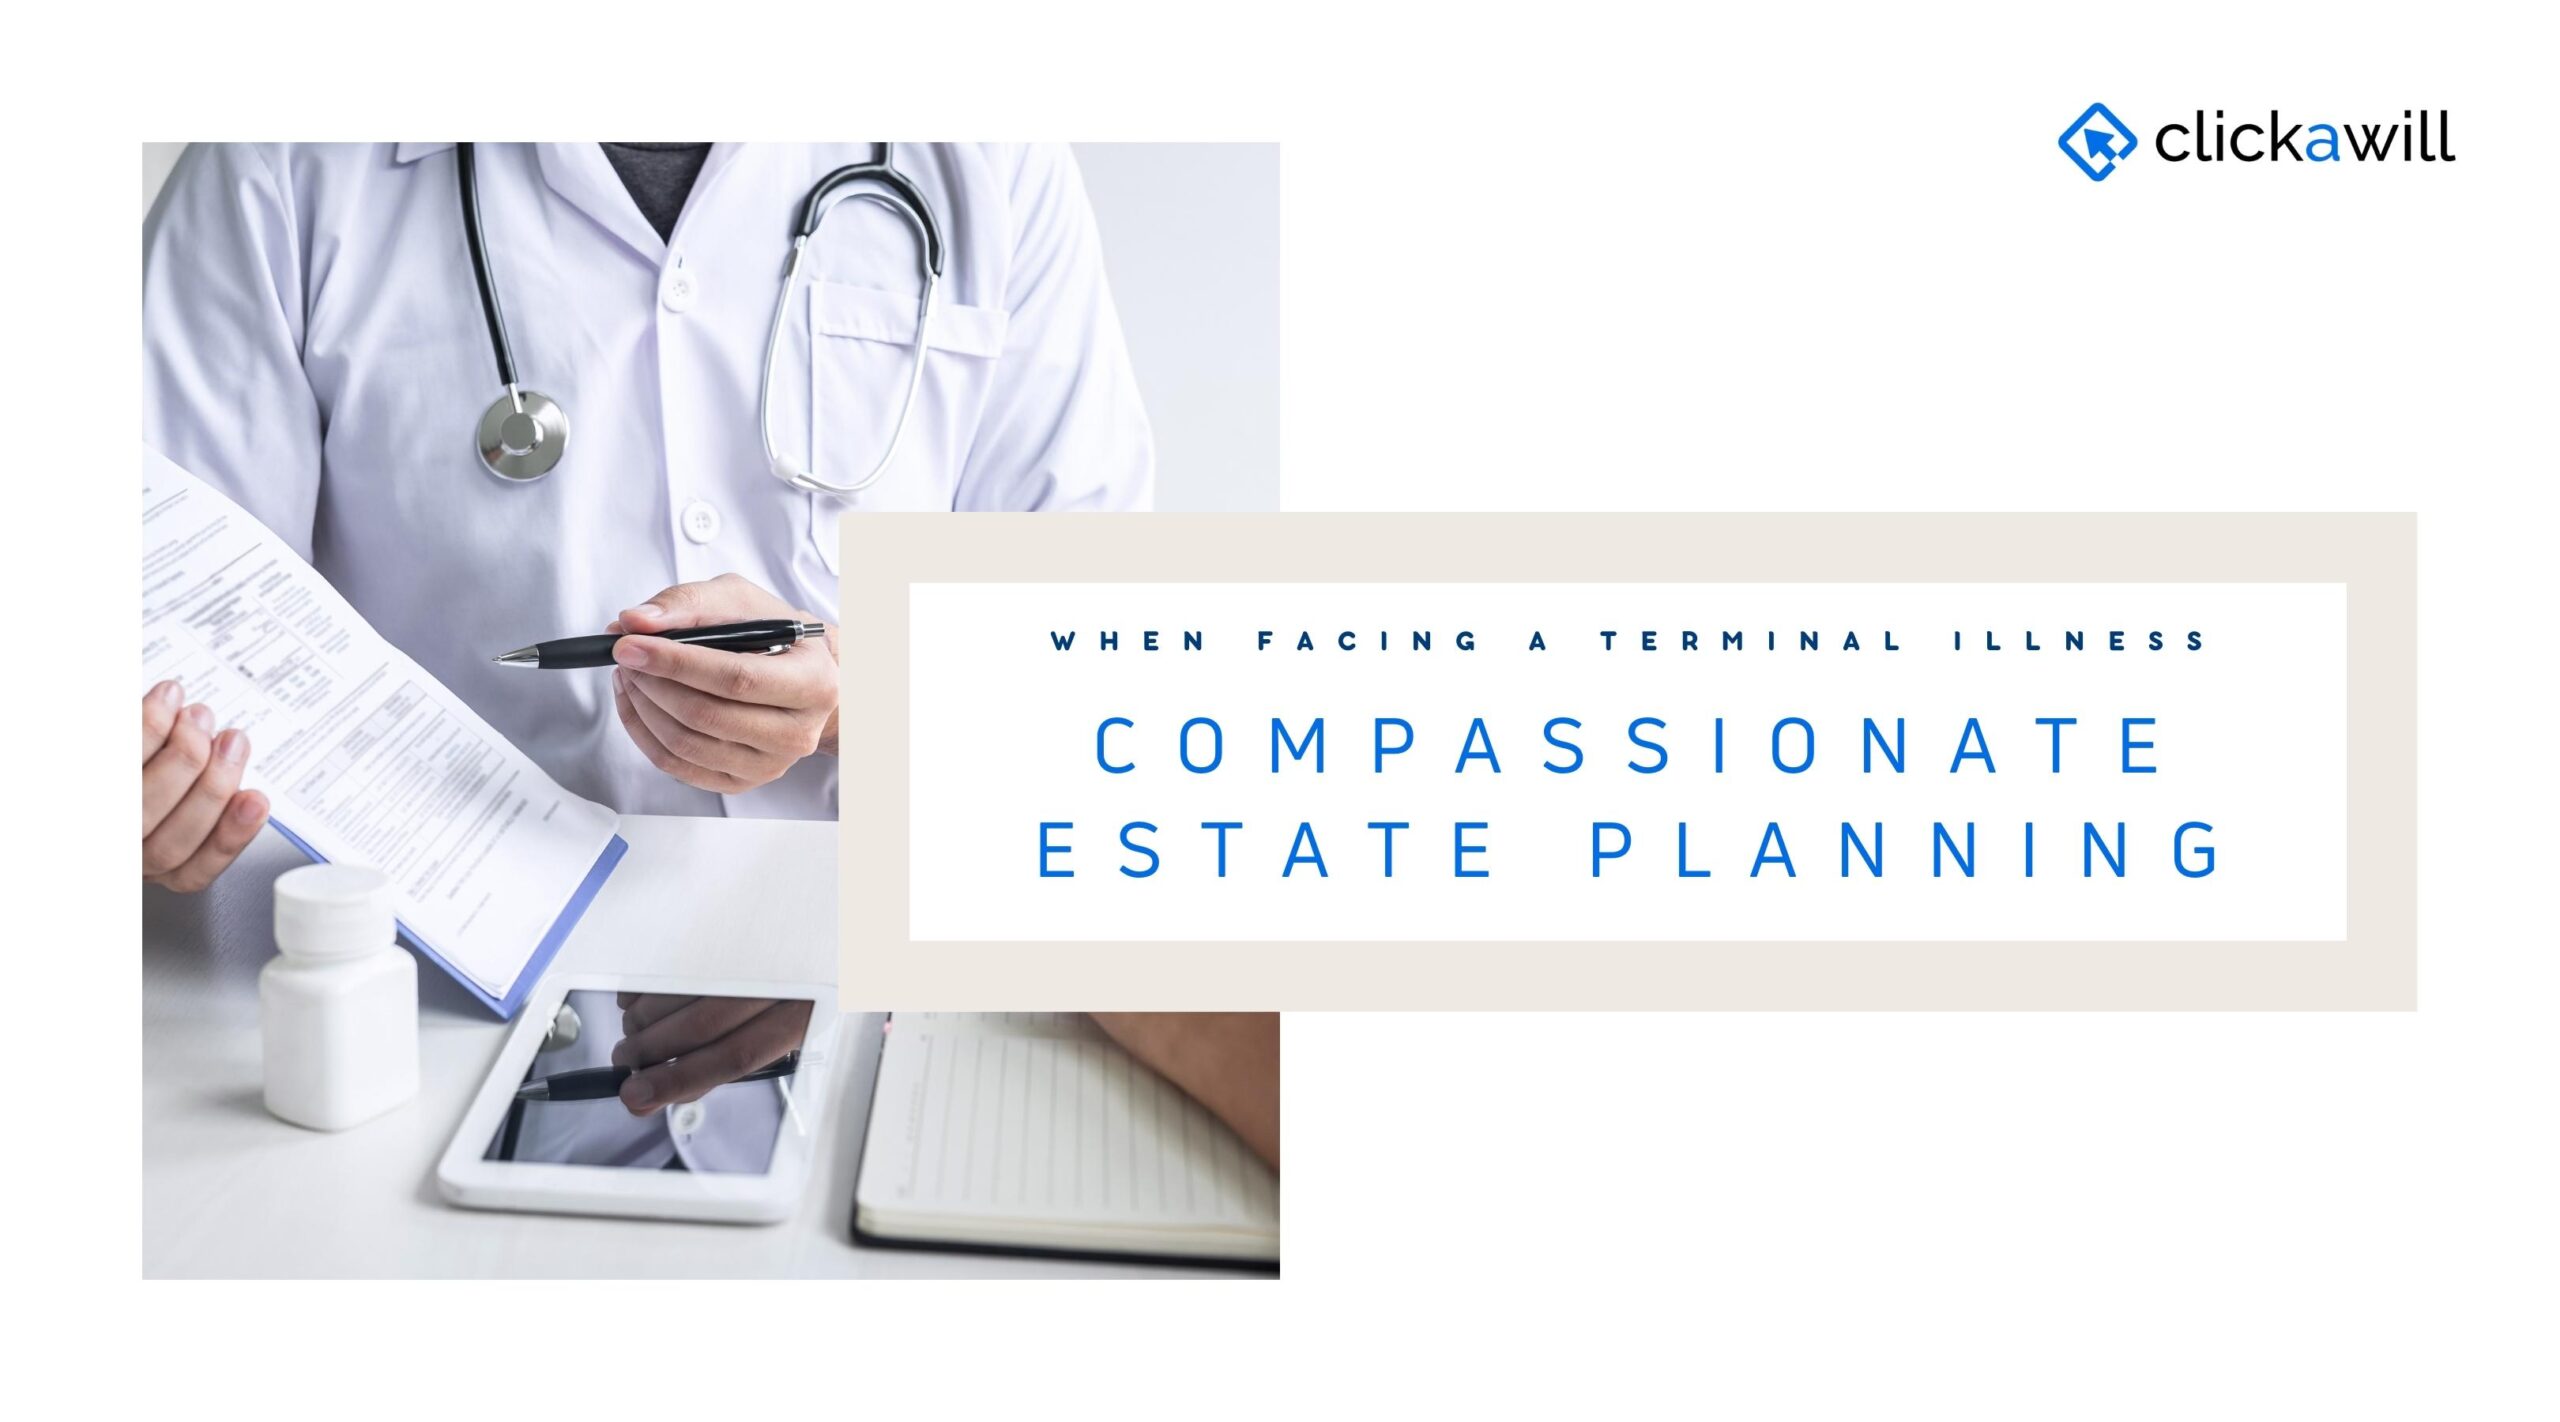 Compassionate Estate Planning: Guiding Principles for Those Terminally Ill